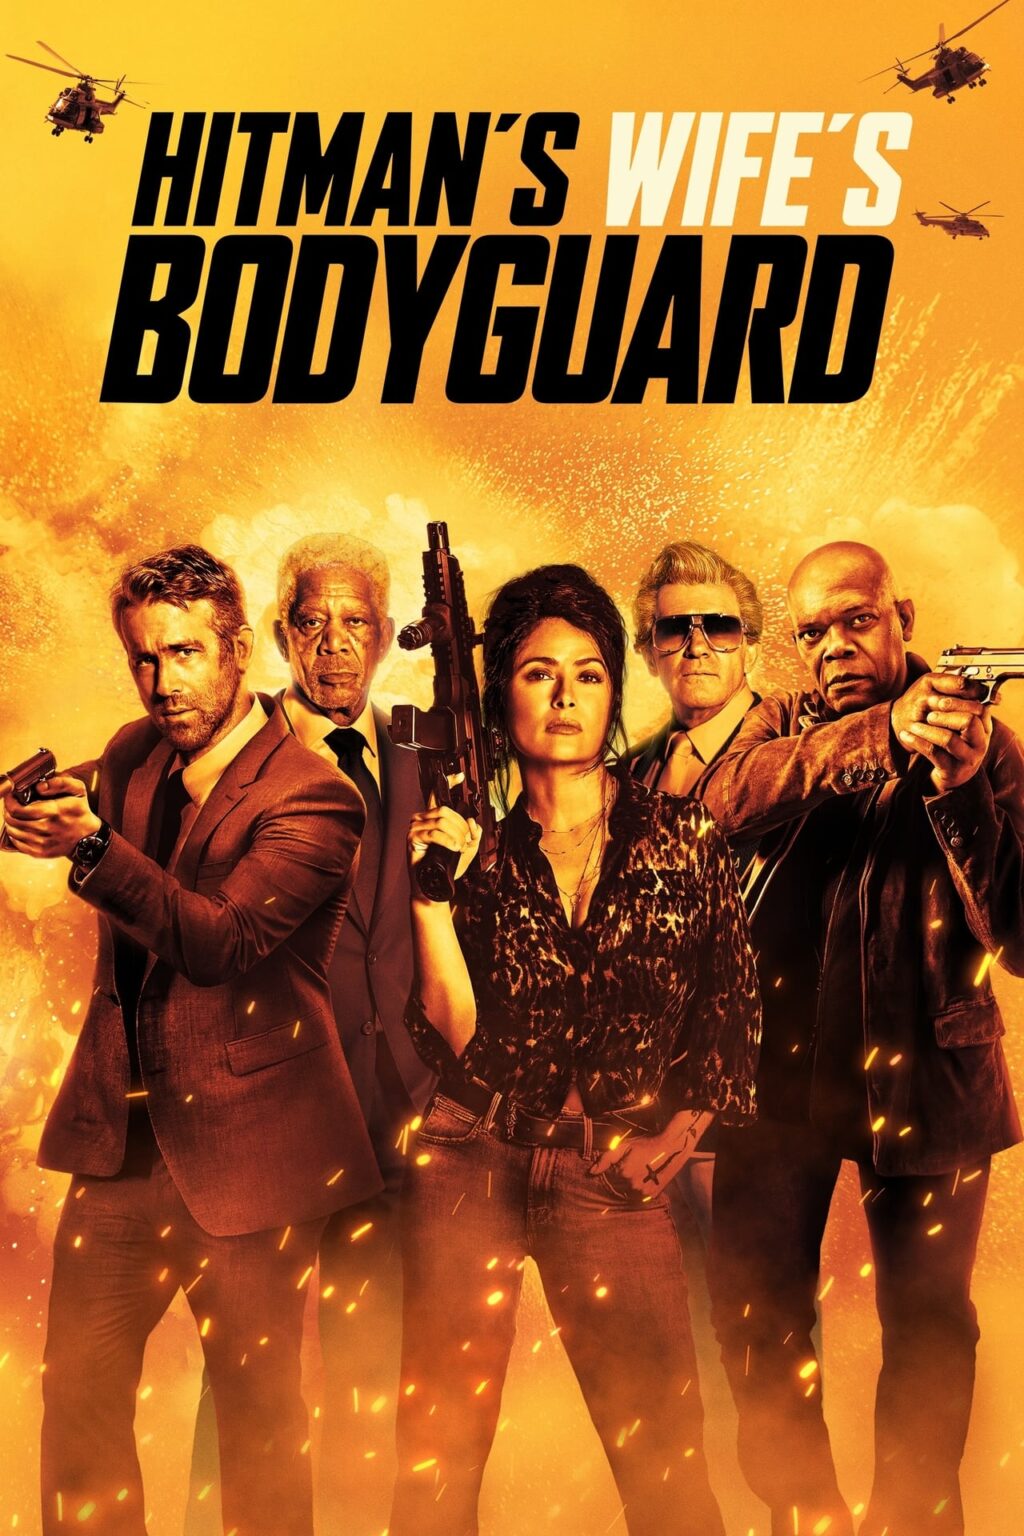 movie review the hitman's wife's bodyguard